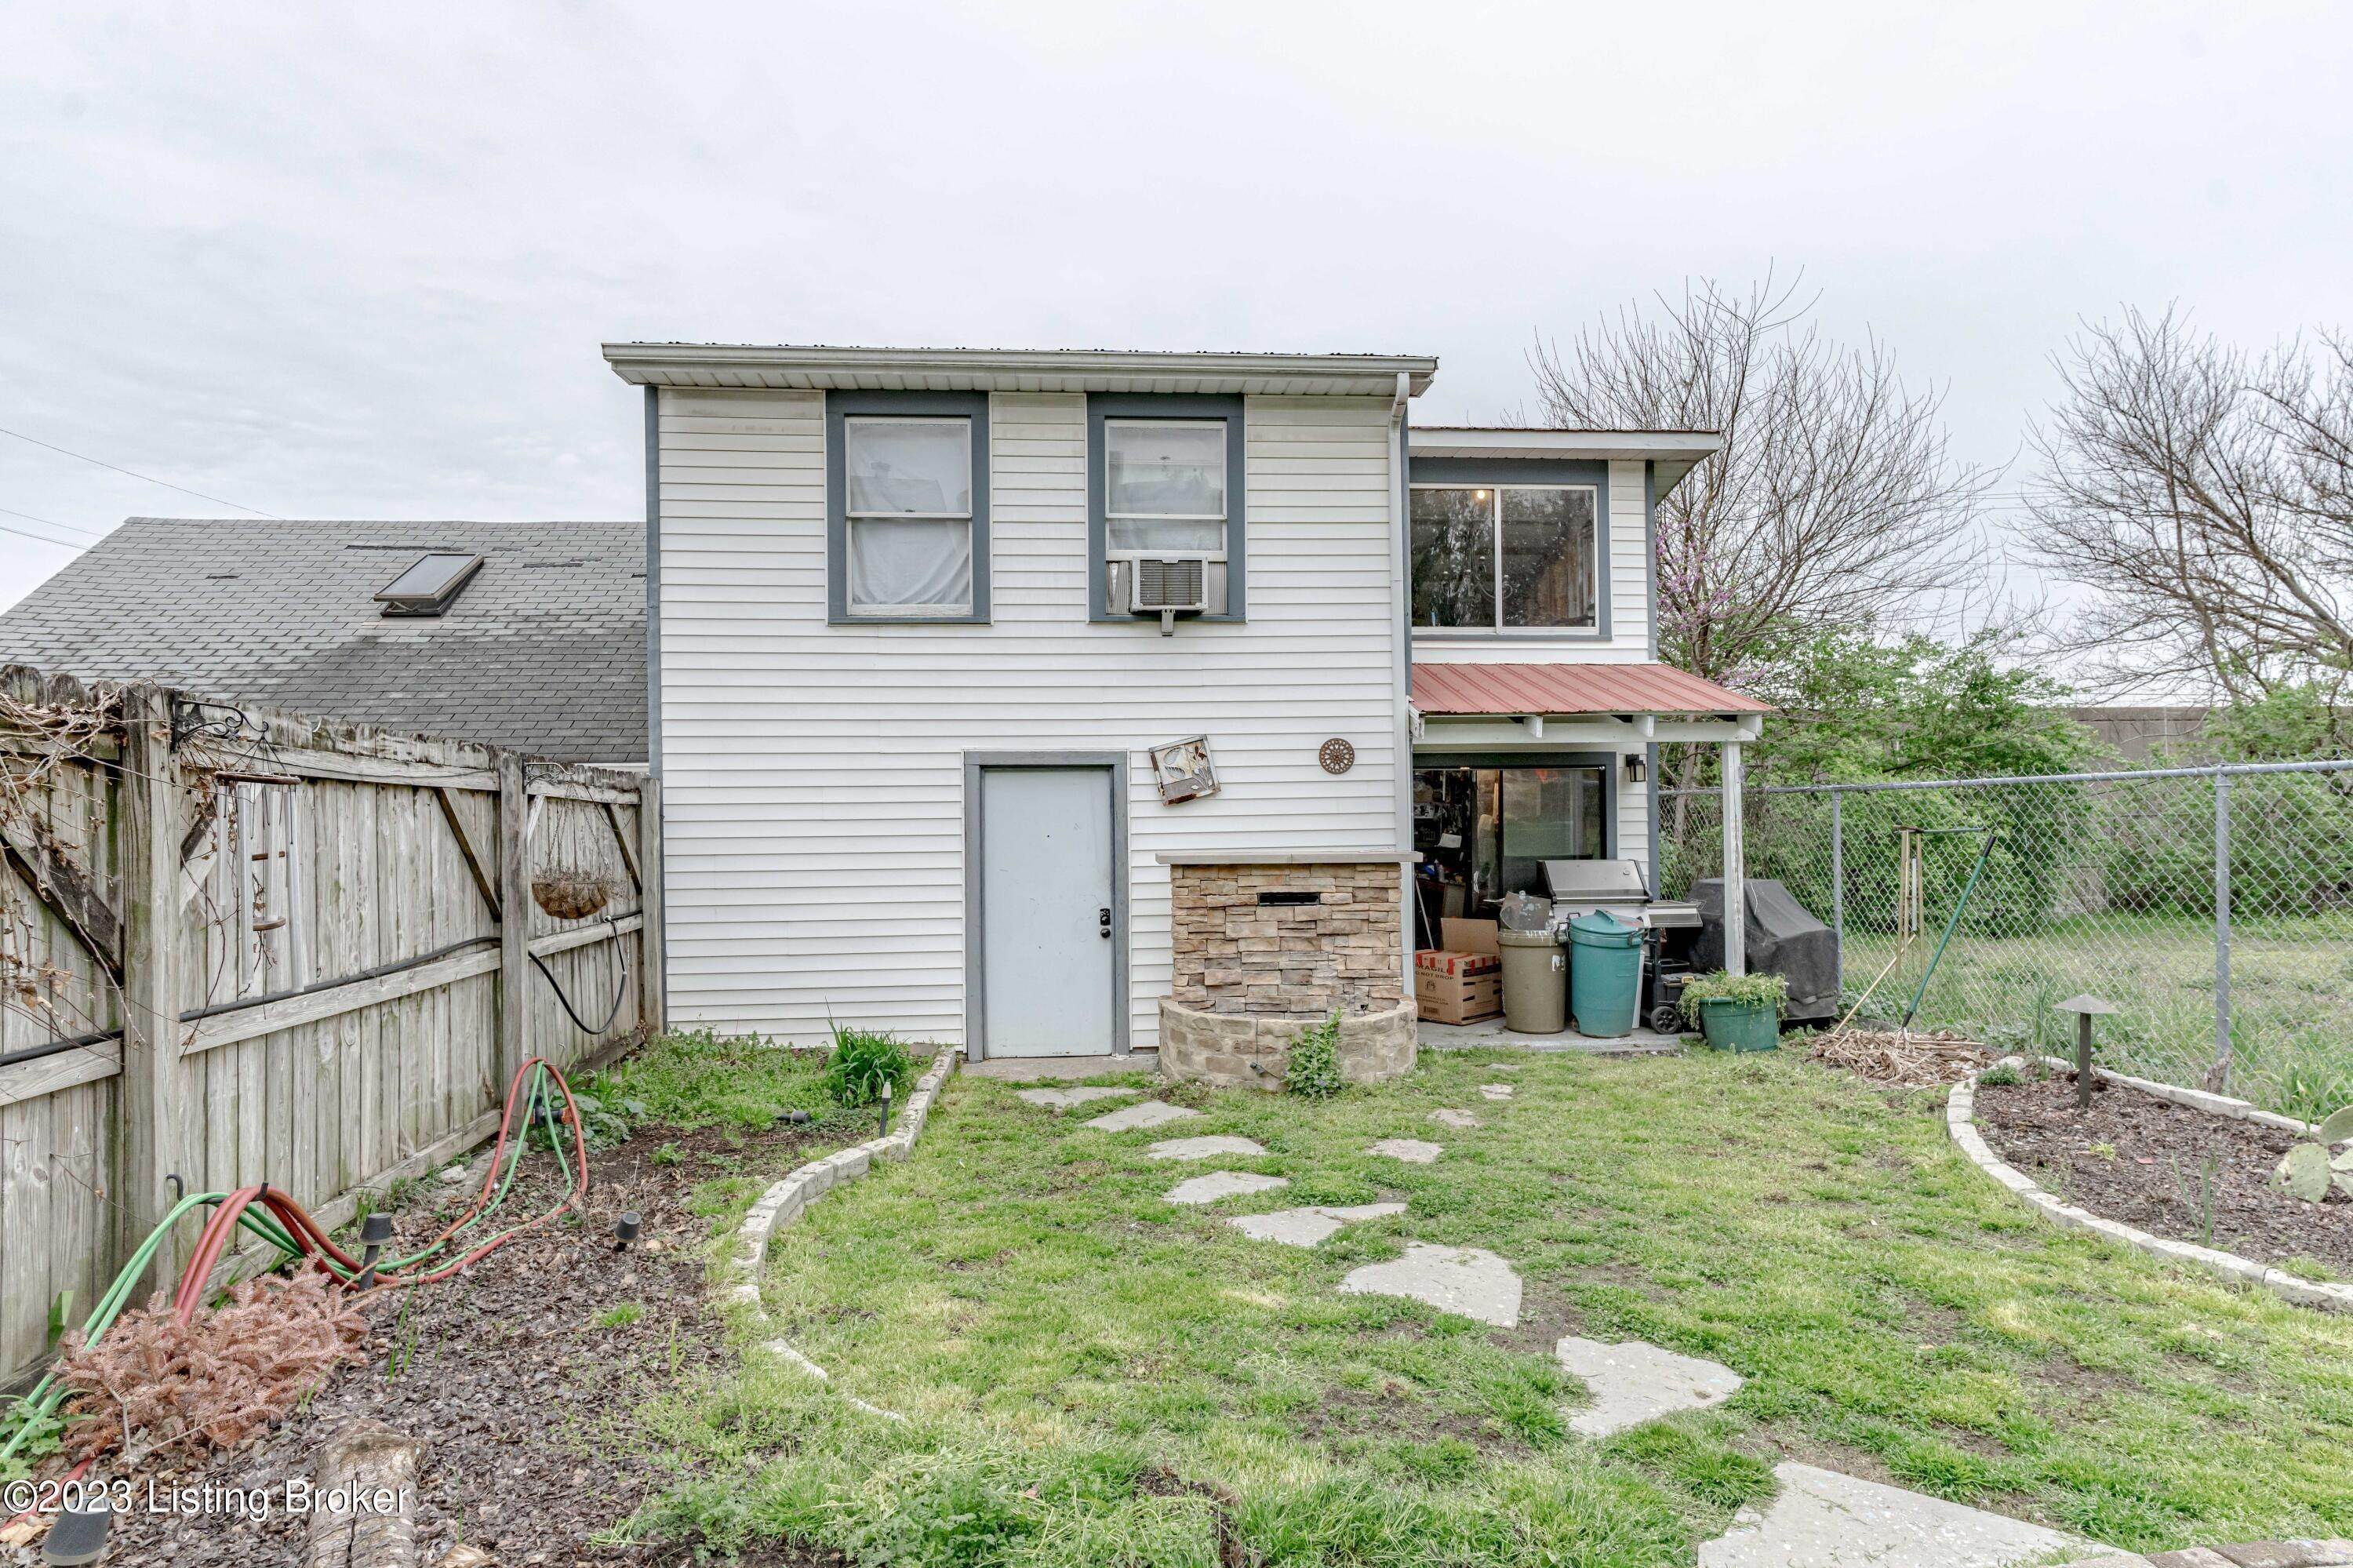 43. Single Family at Louisville, KY 40206